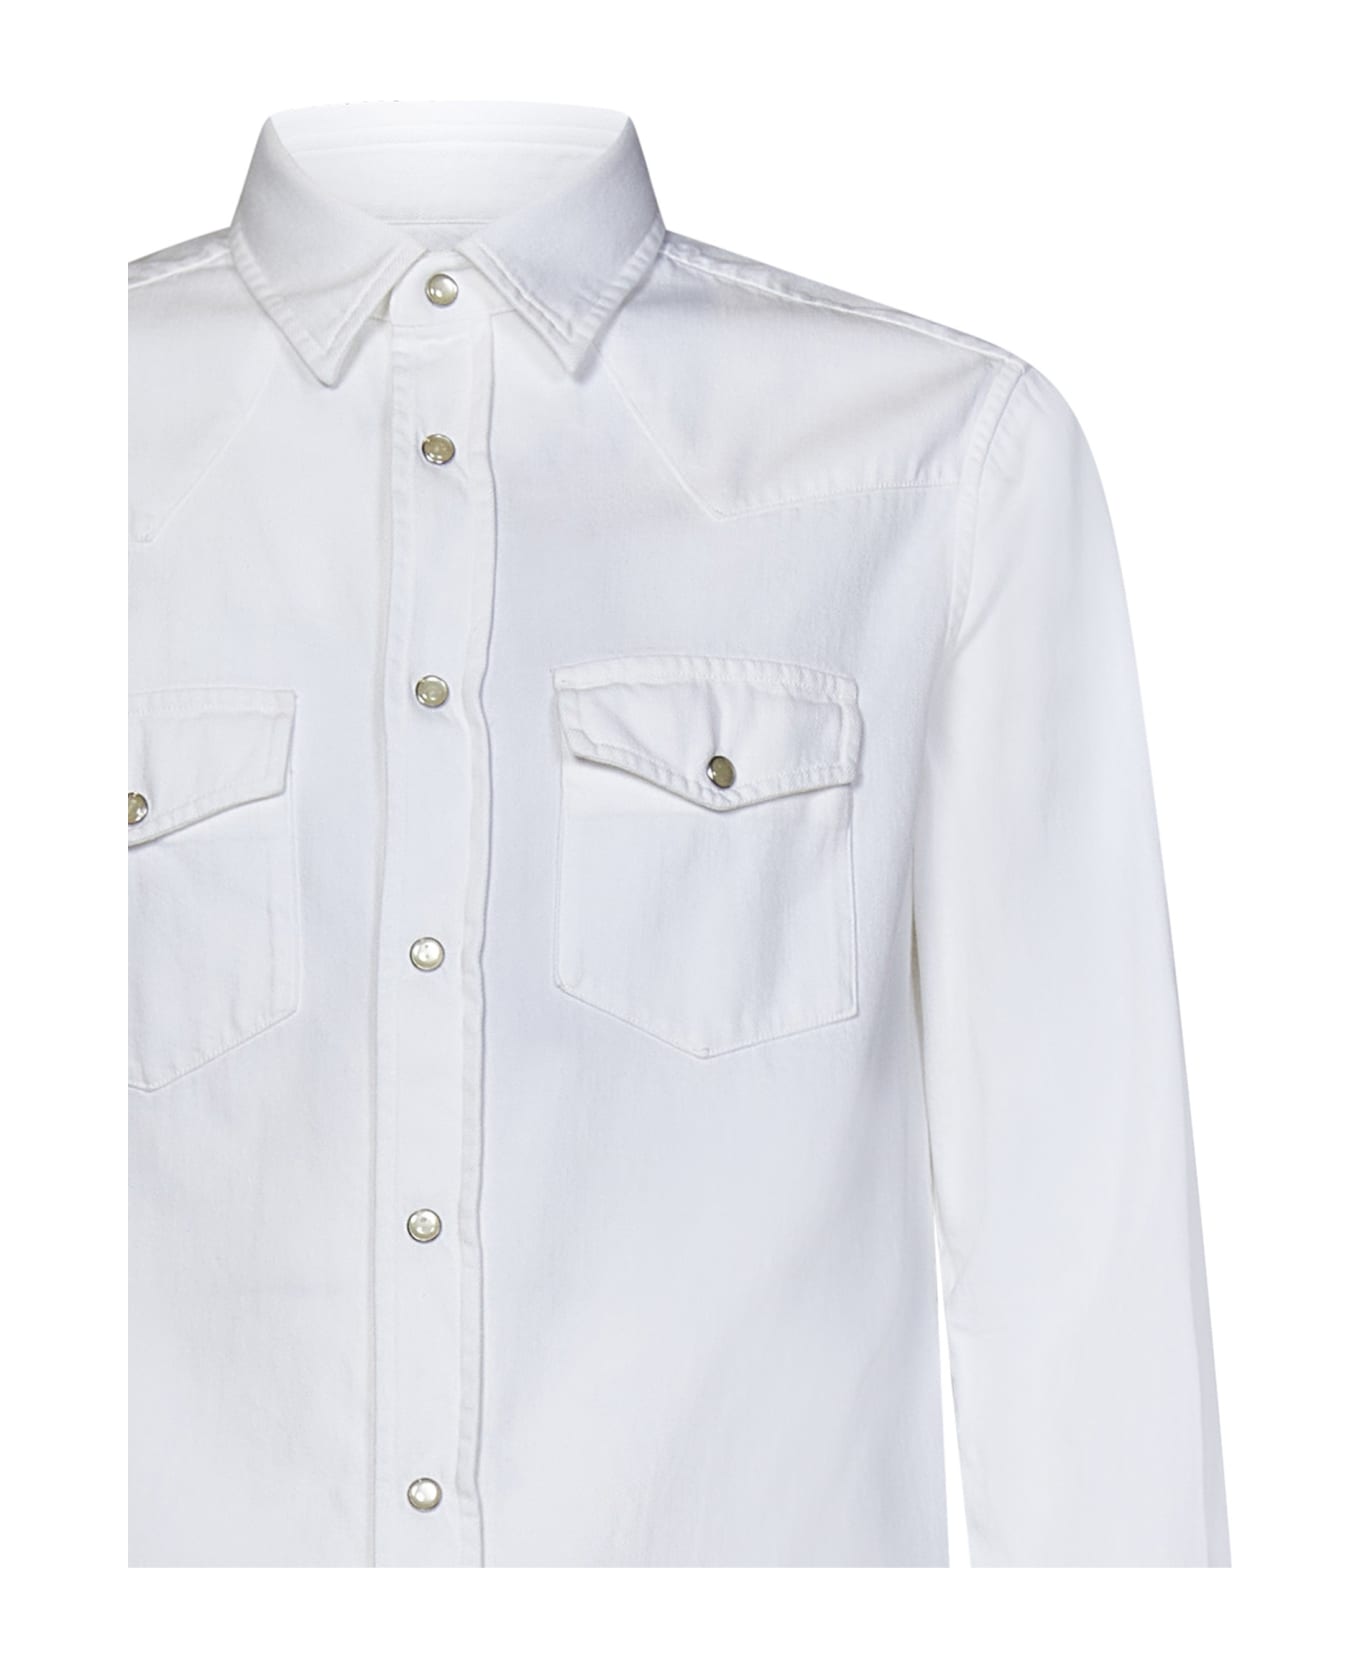 Tom Ford Patch Pocket Long-sleeved Shirt - White